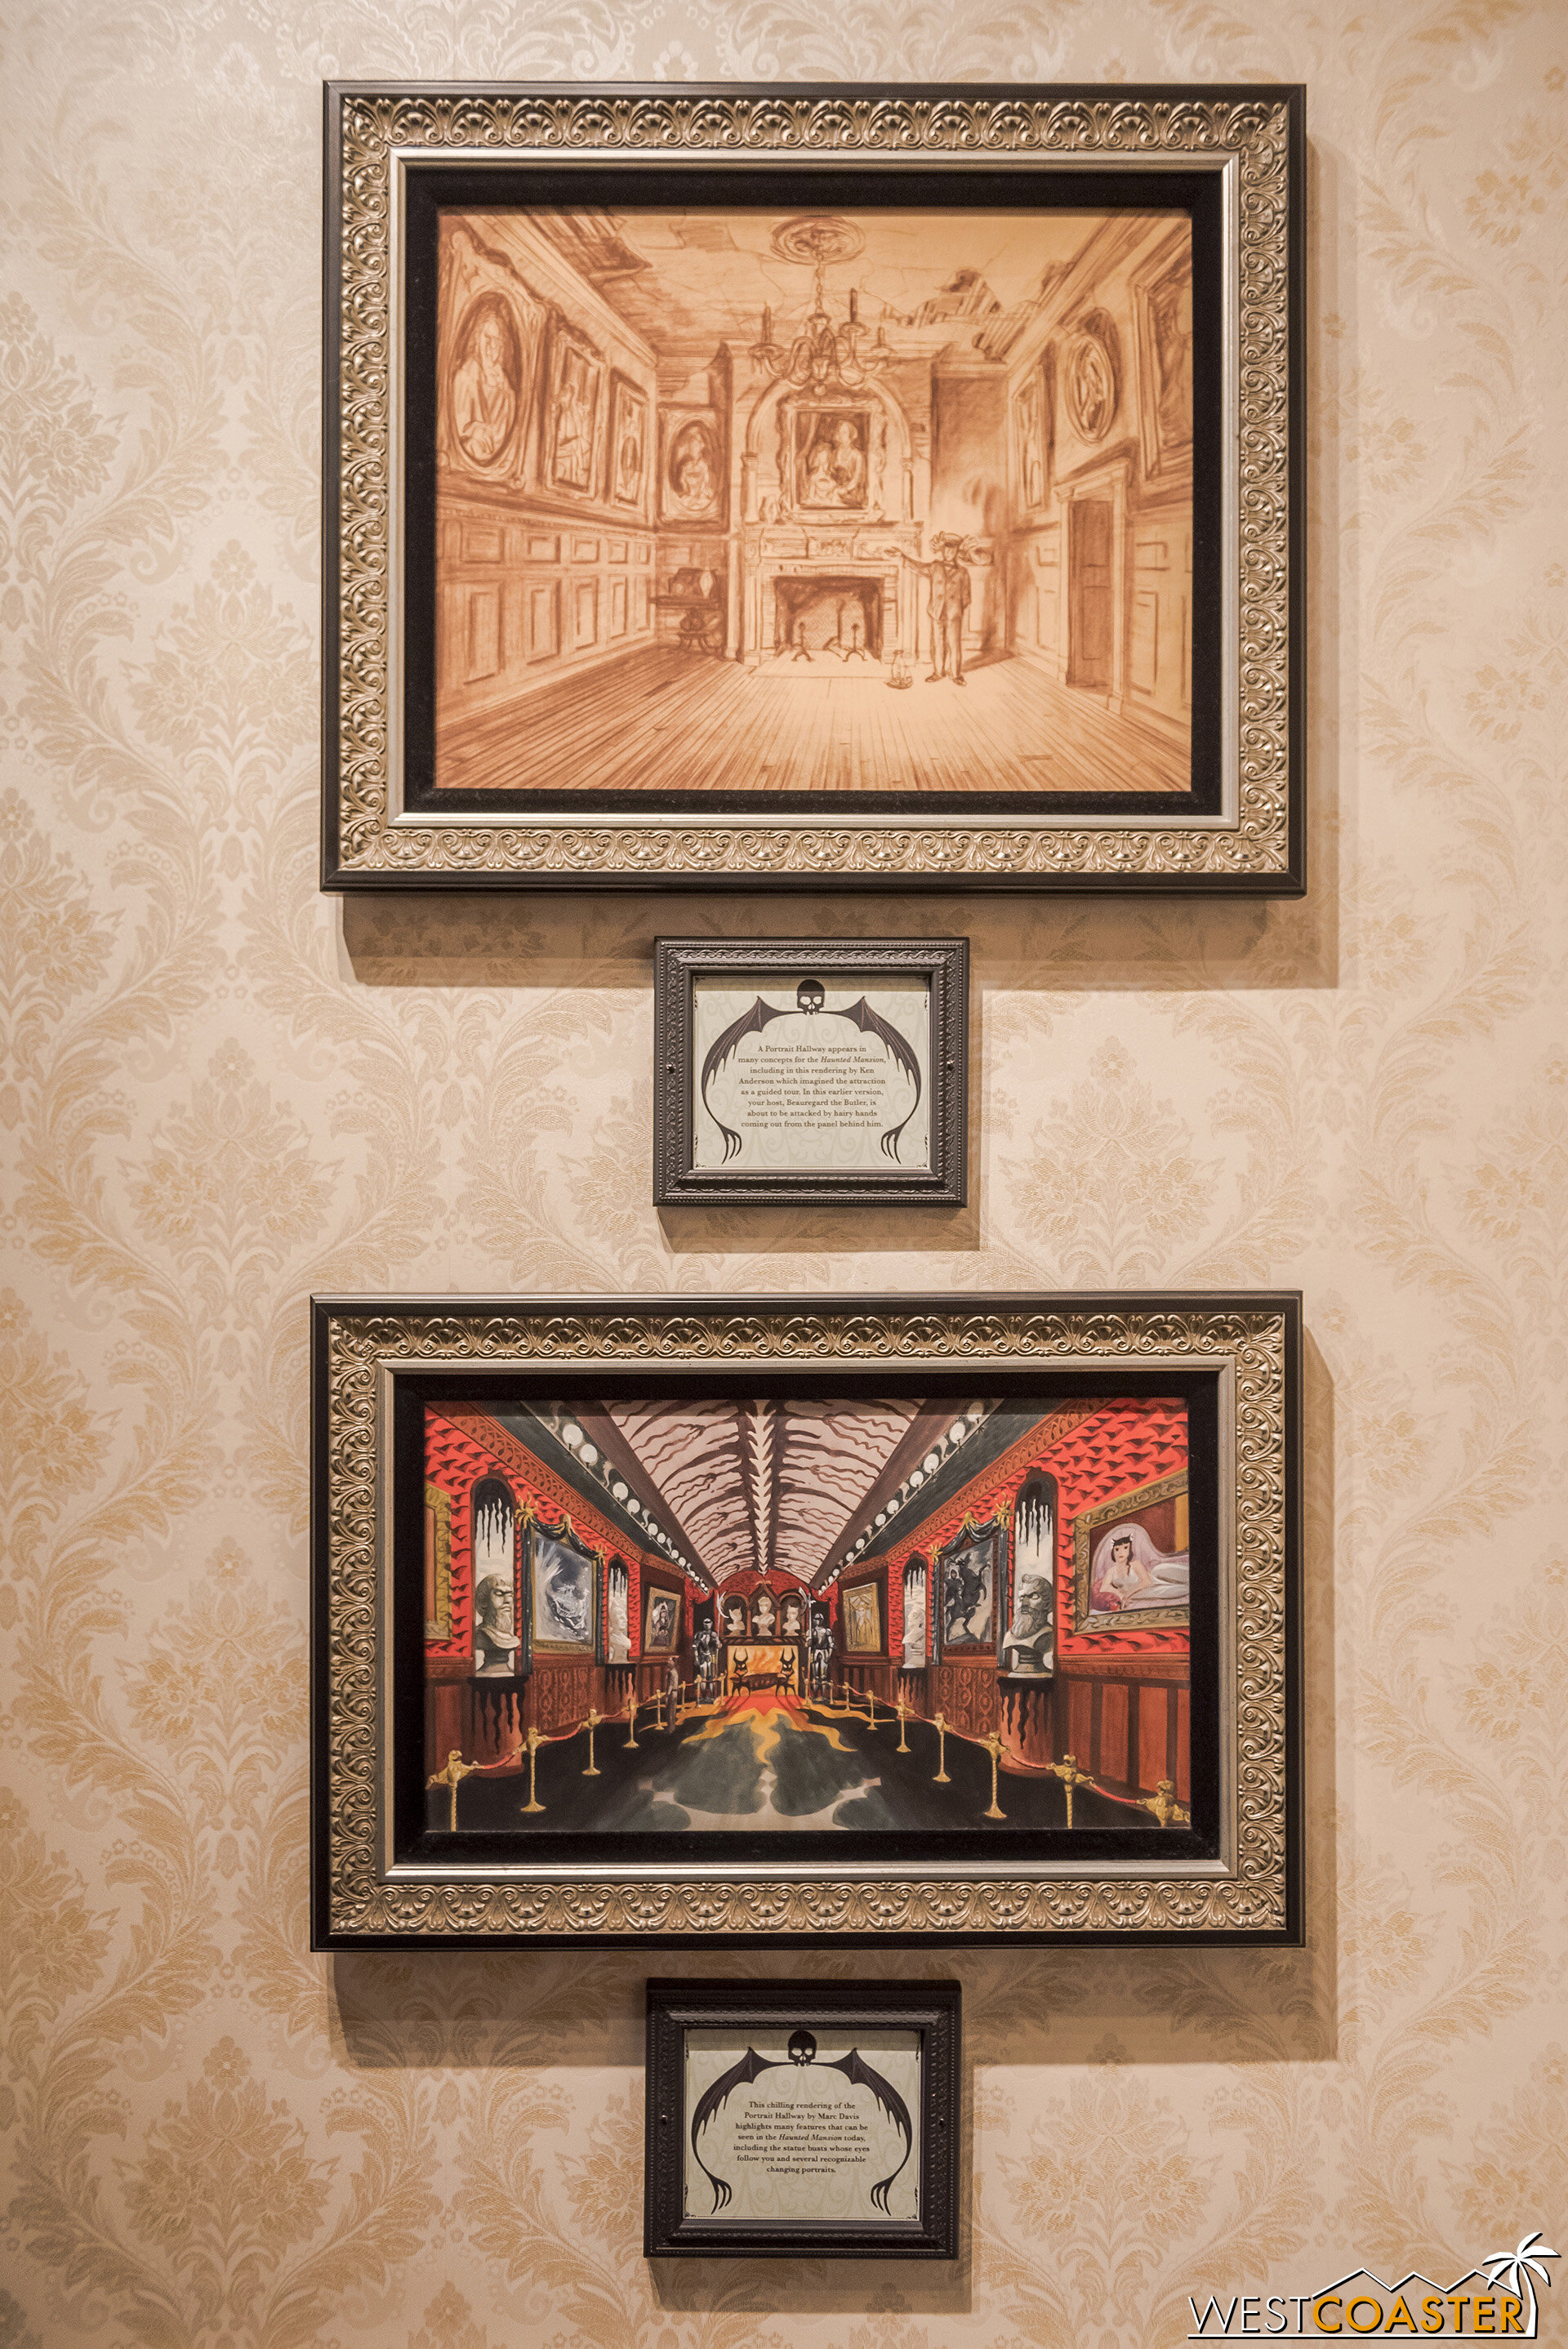  The Disney Gallery currently has a plethora of great concept art that shows early ideas for the Haunted Mansion—some that were discarded, some that were used, and some that evolved into scenes we recognize today! 